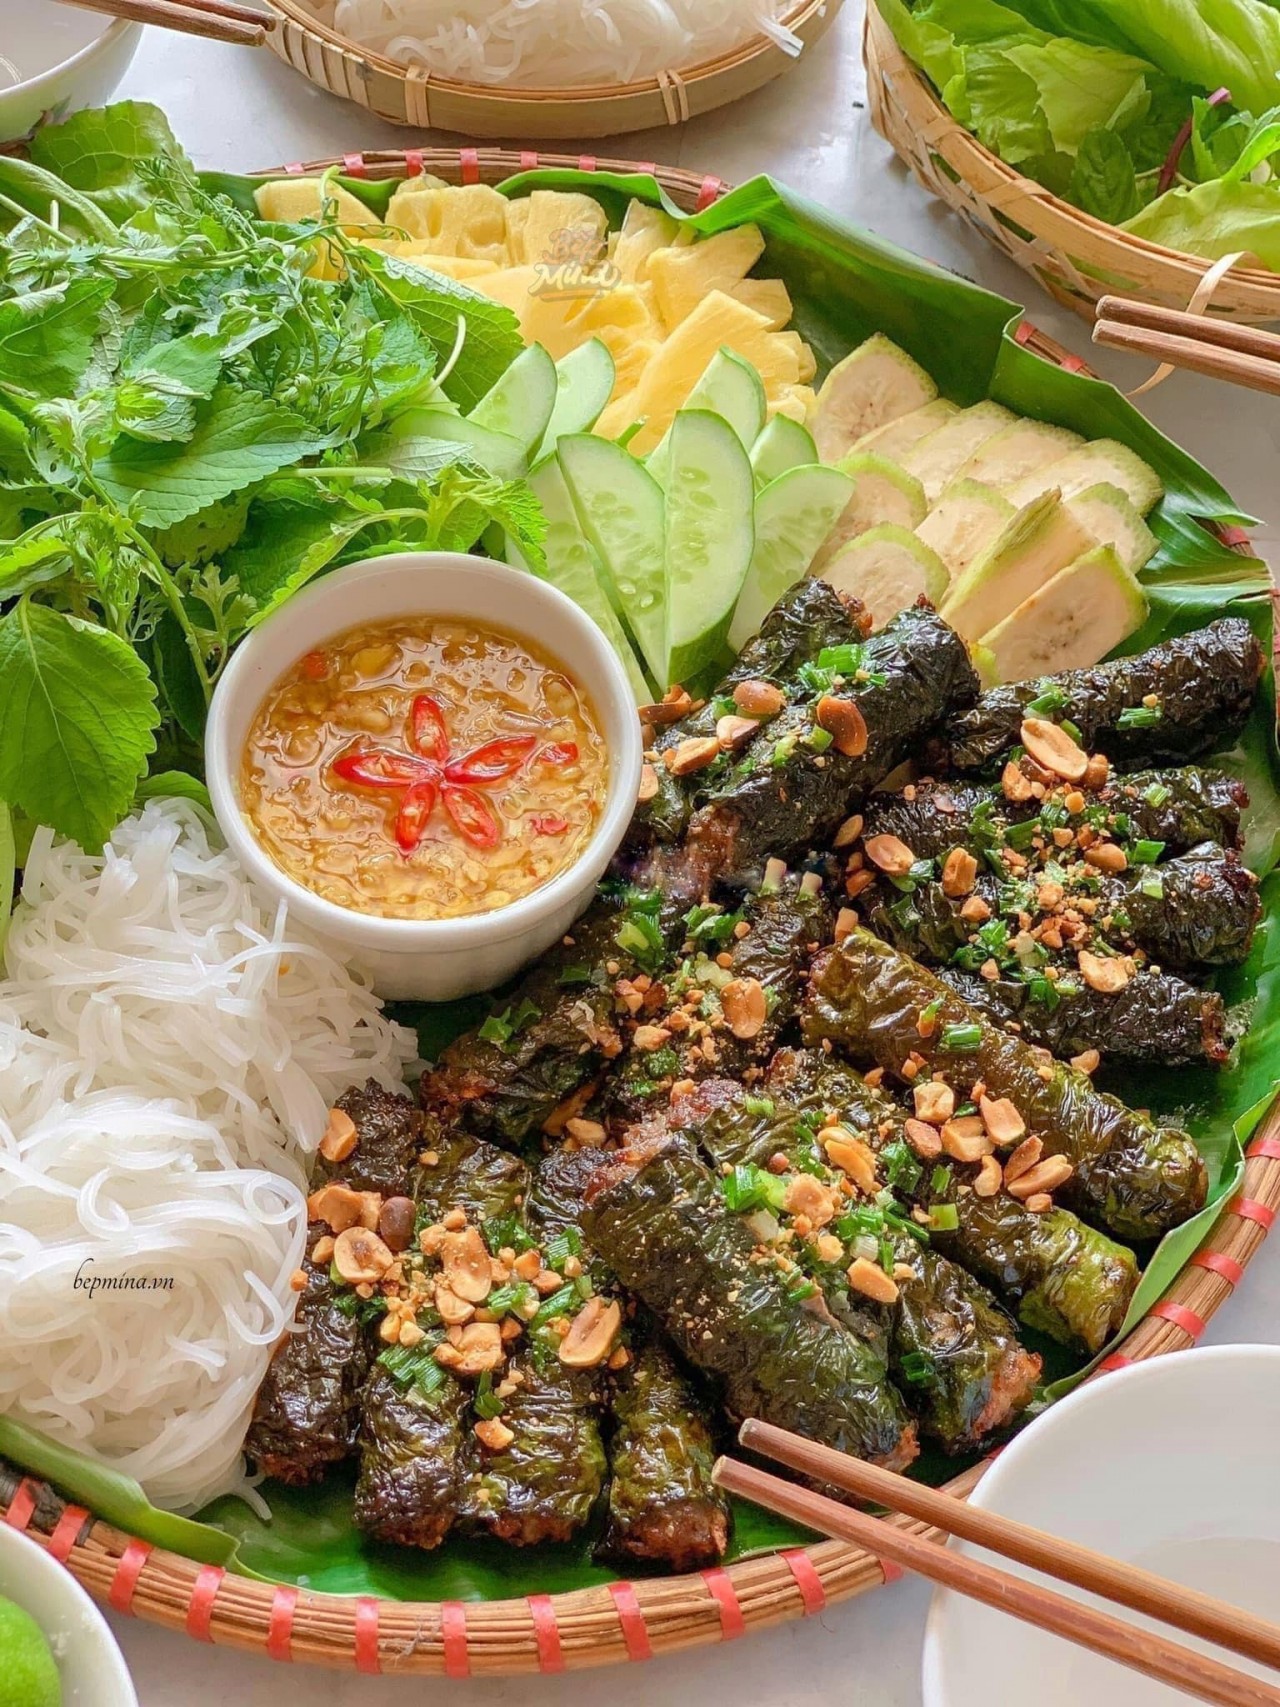 Australia's Article Hails Vietnamese “Beef in A Leaf” as One of World’s Best Dishes